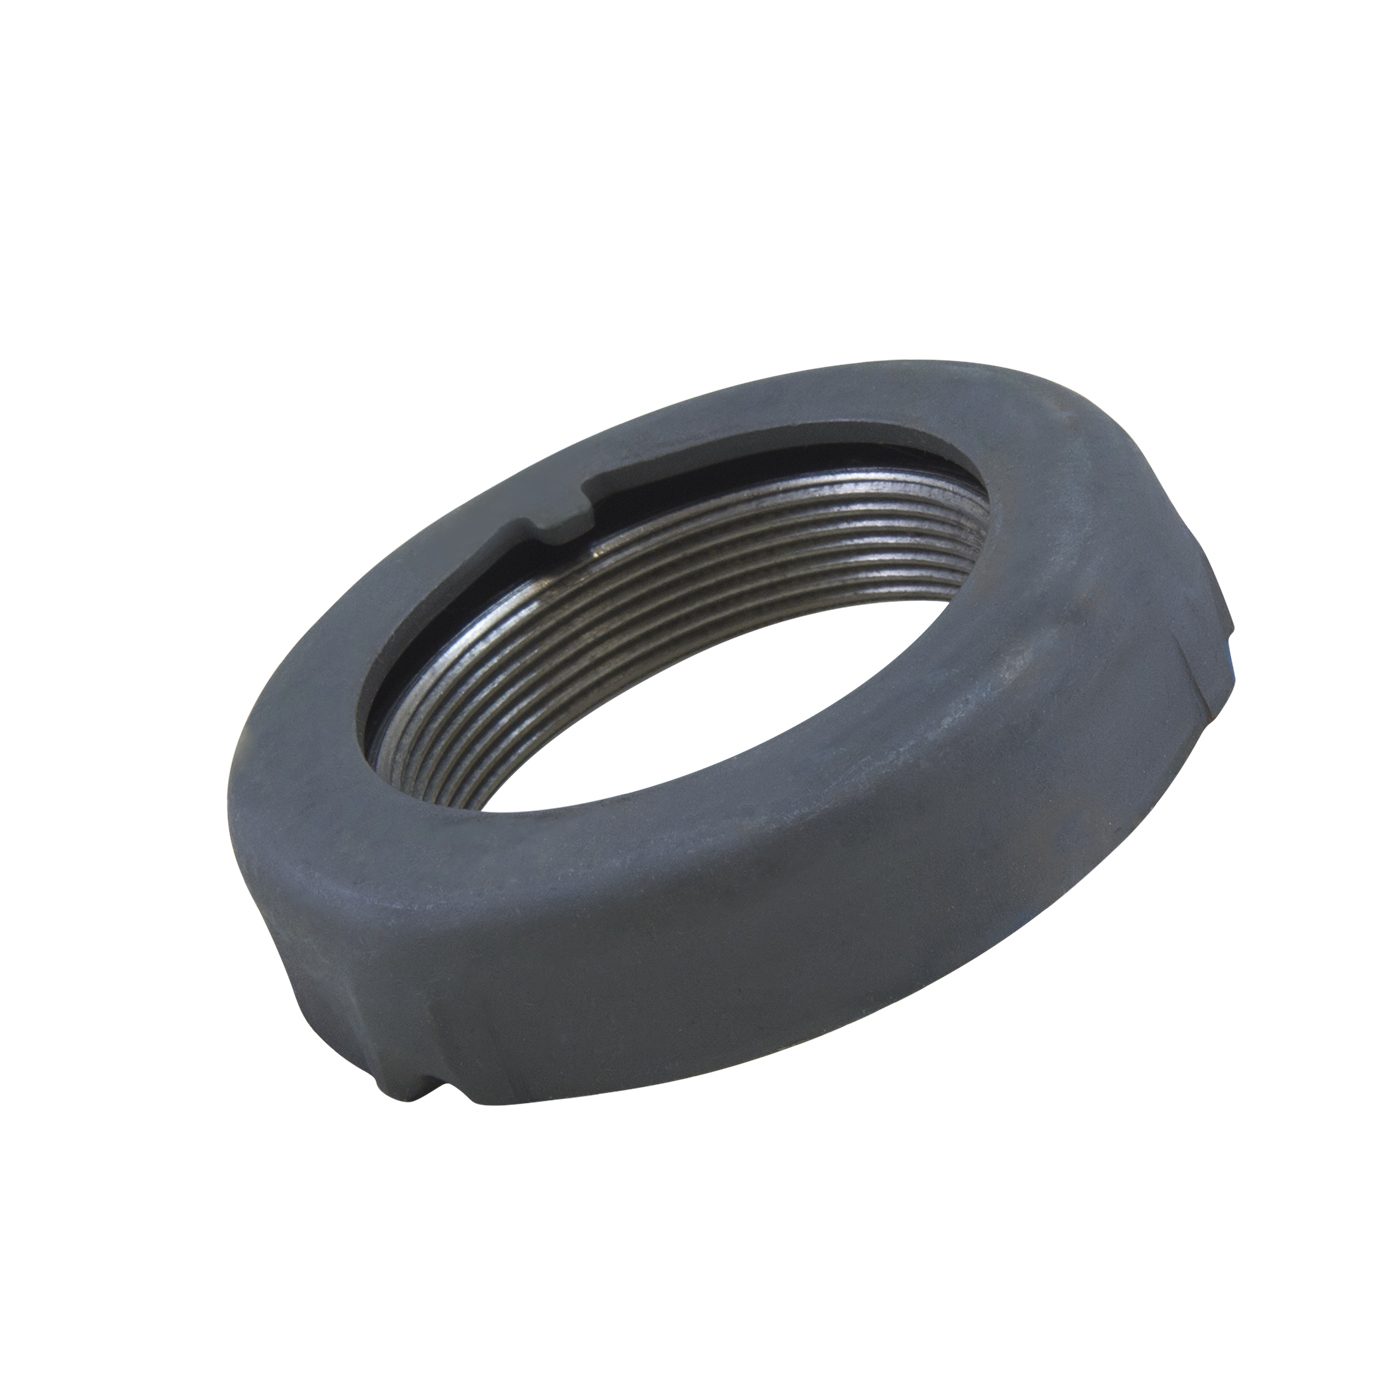 Left hand spindle nut for Ford 10.25", self ratcheting type.